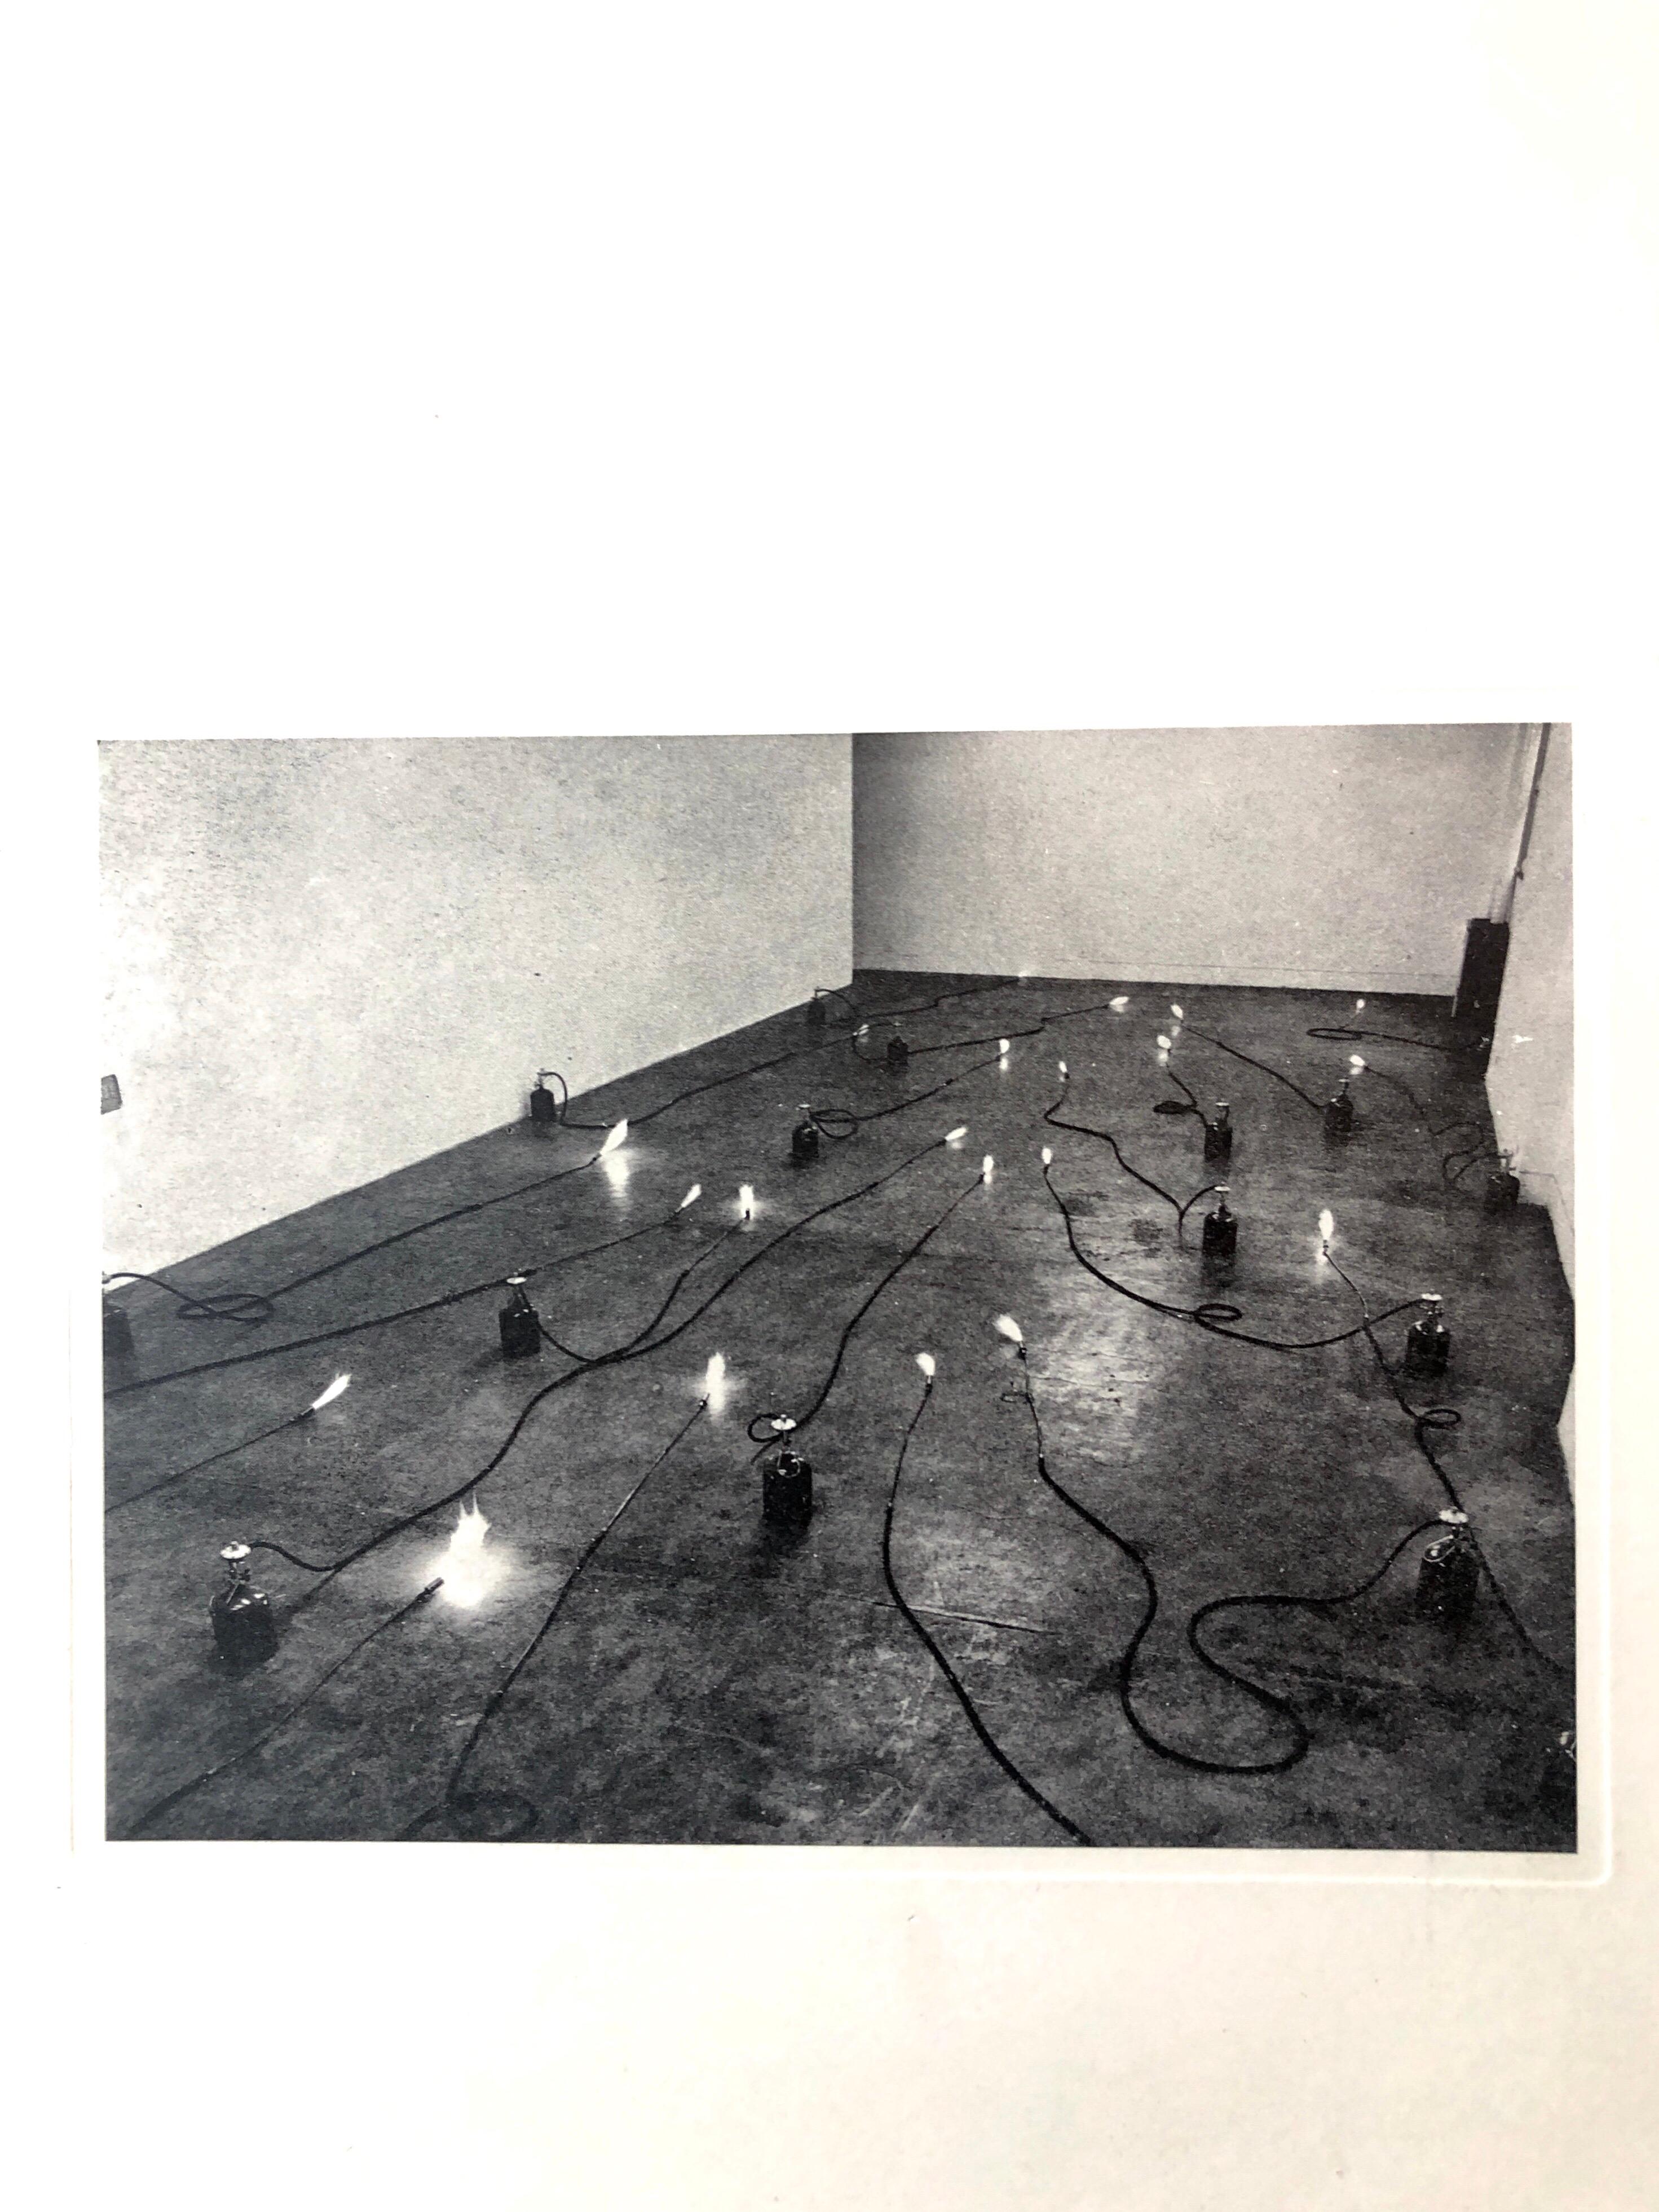 'Lo faro il litterato tutta la vita'
Photo Lithography on rag paper
hand signed lower right in pencil: Kounellis
numbered 37/90.
Provenance: The Collection of Ileana Sonnabend (Mrs Leo Castelli) & the Estate of Nina Castelli Sundell
I have seen this